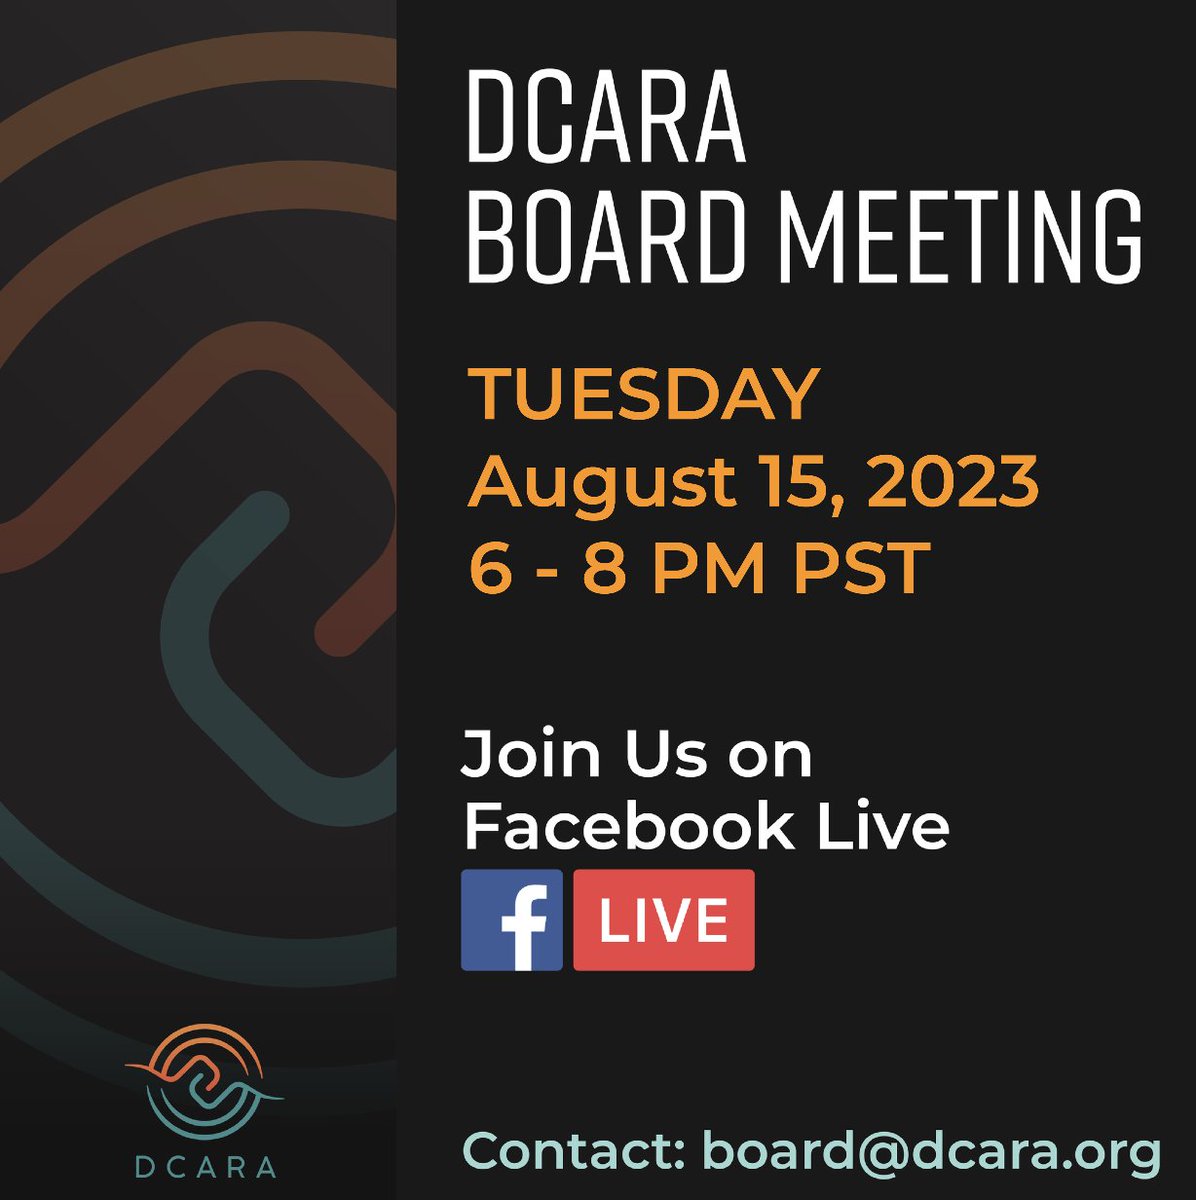 [COMMUNITY ANNOUNCEMENT]

Join us on Facebook Live for a live-streamed DCARA Board Meeting on Tuesday, August 15, 2023 at 6 - 8pm PST.

#DCARABoard #DeafCommunity #DCARA1962